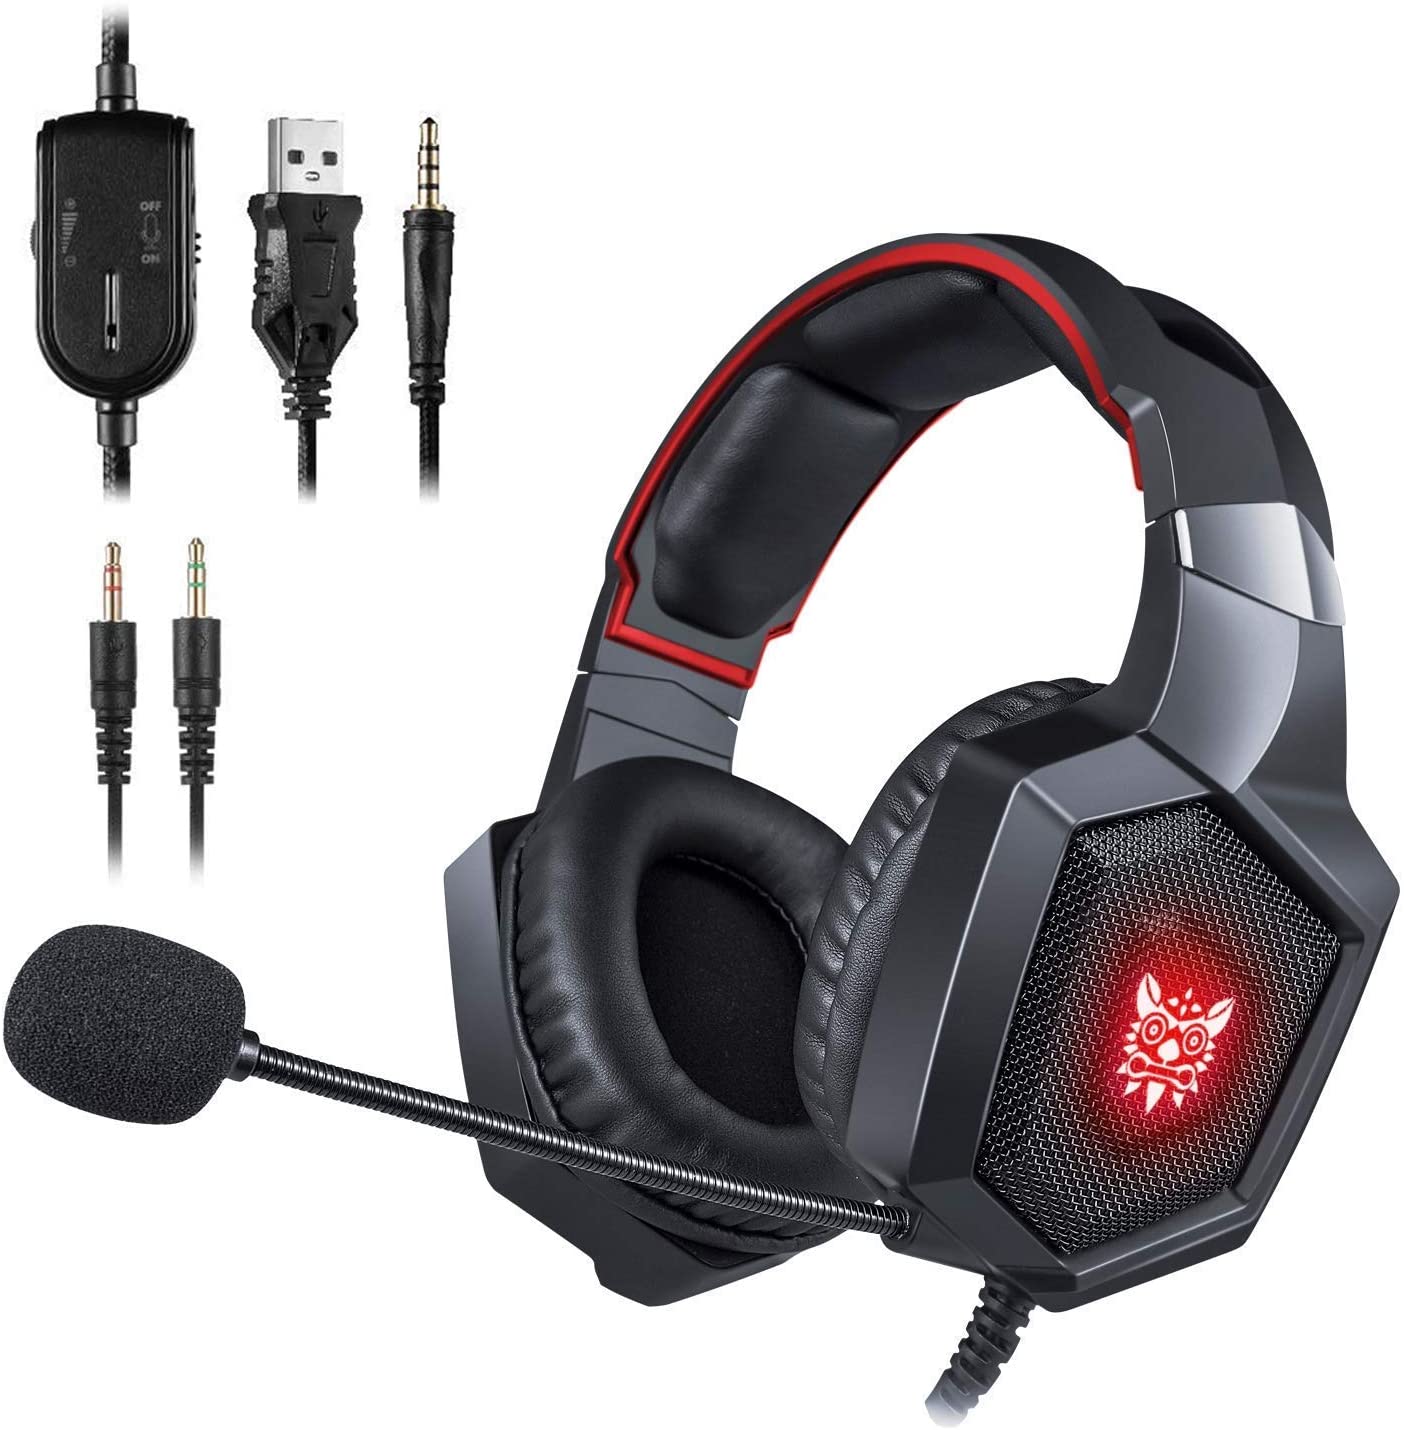 Gaming Headset - Stereo K8 Gaming Headset for PS4, New Xbox One, Noise Cancelling Mic Over Ears Gaming Headphones with Microphone for Playstation 4 Laptop Smartphones and PC (Black)